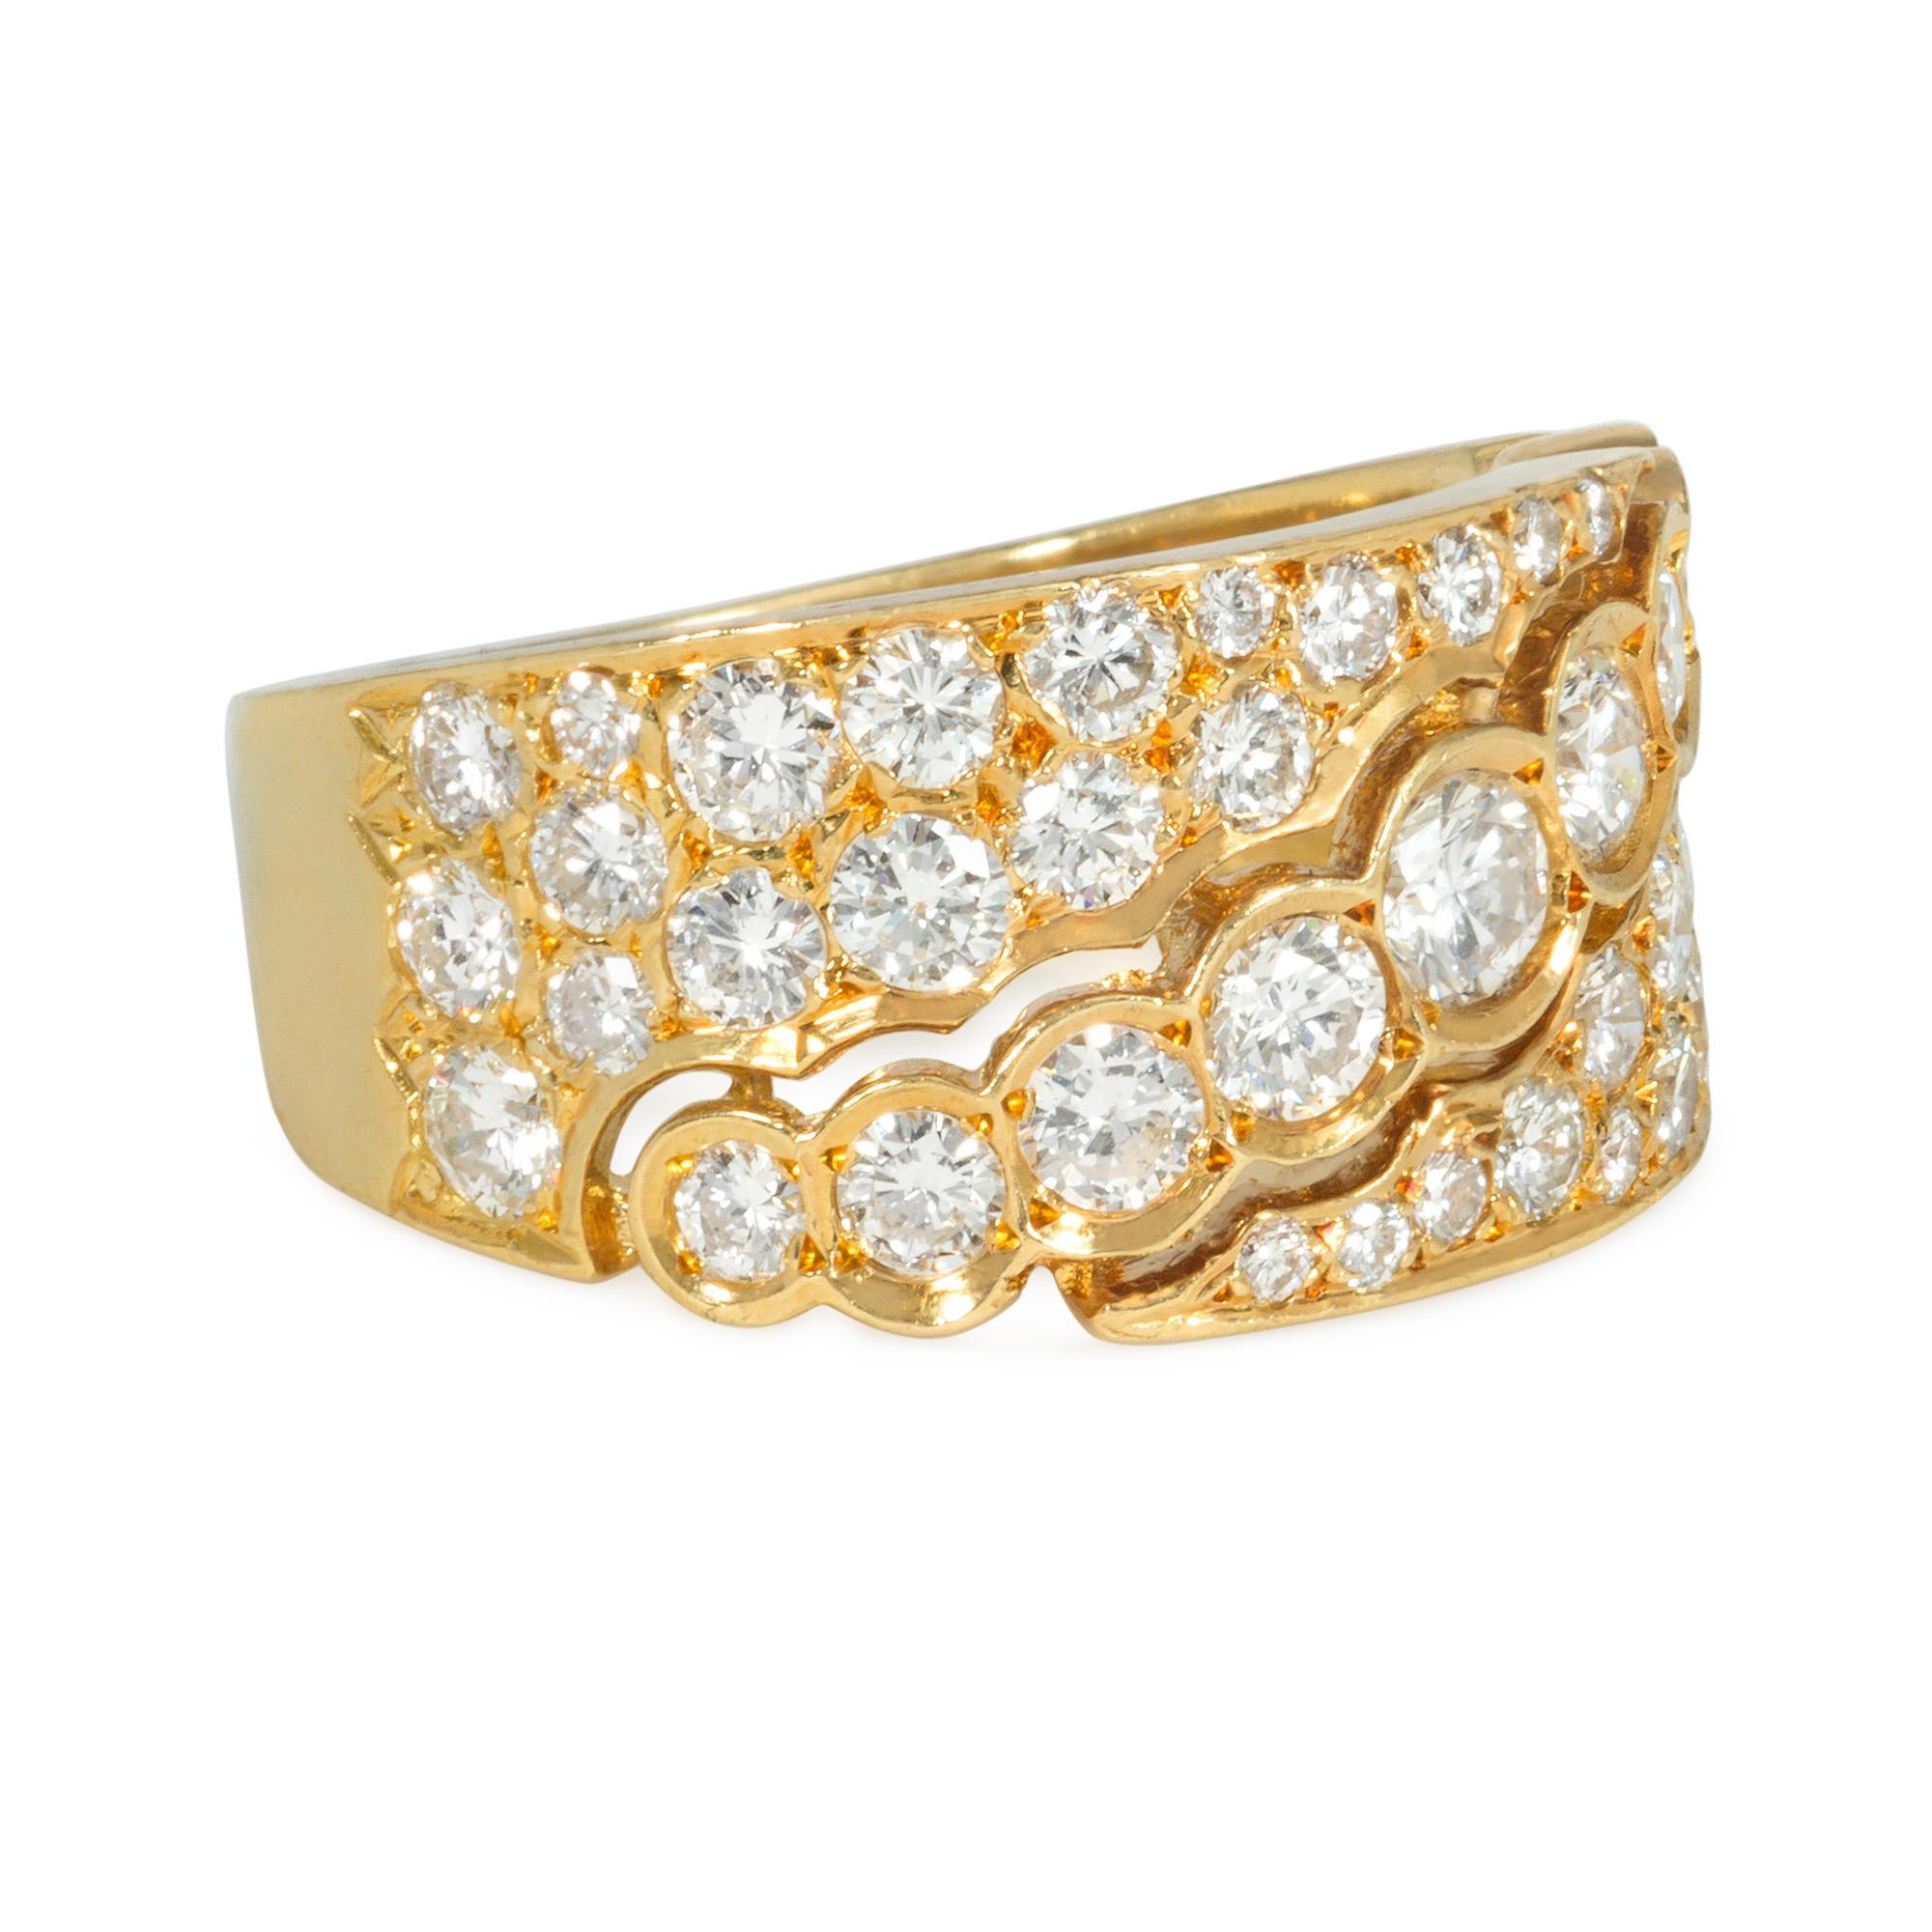 A late 20th-century gold and diamond band-style ring, the pierced and tapered pavé diamond face bisected diagonally by a graduated line of collet-set diamonds, in 18k. Van Cleef & Arpels, France. #C5305 A5

Minor re-sizing possible - please contact